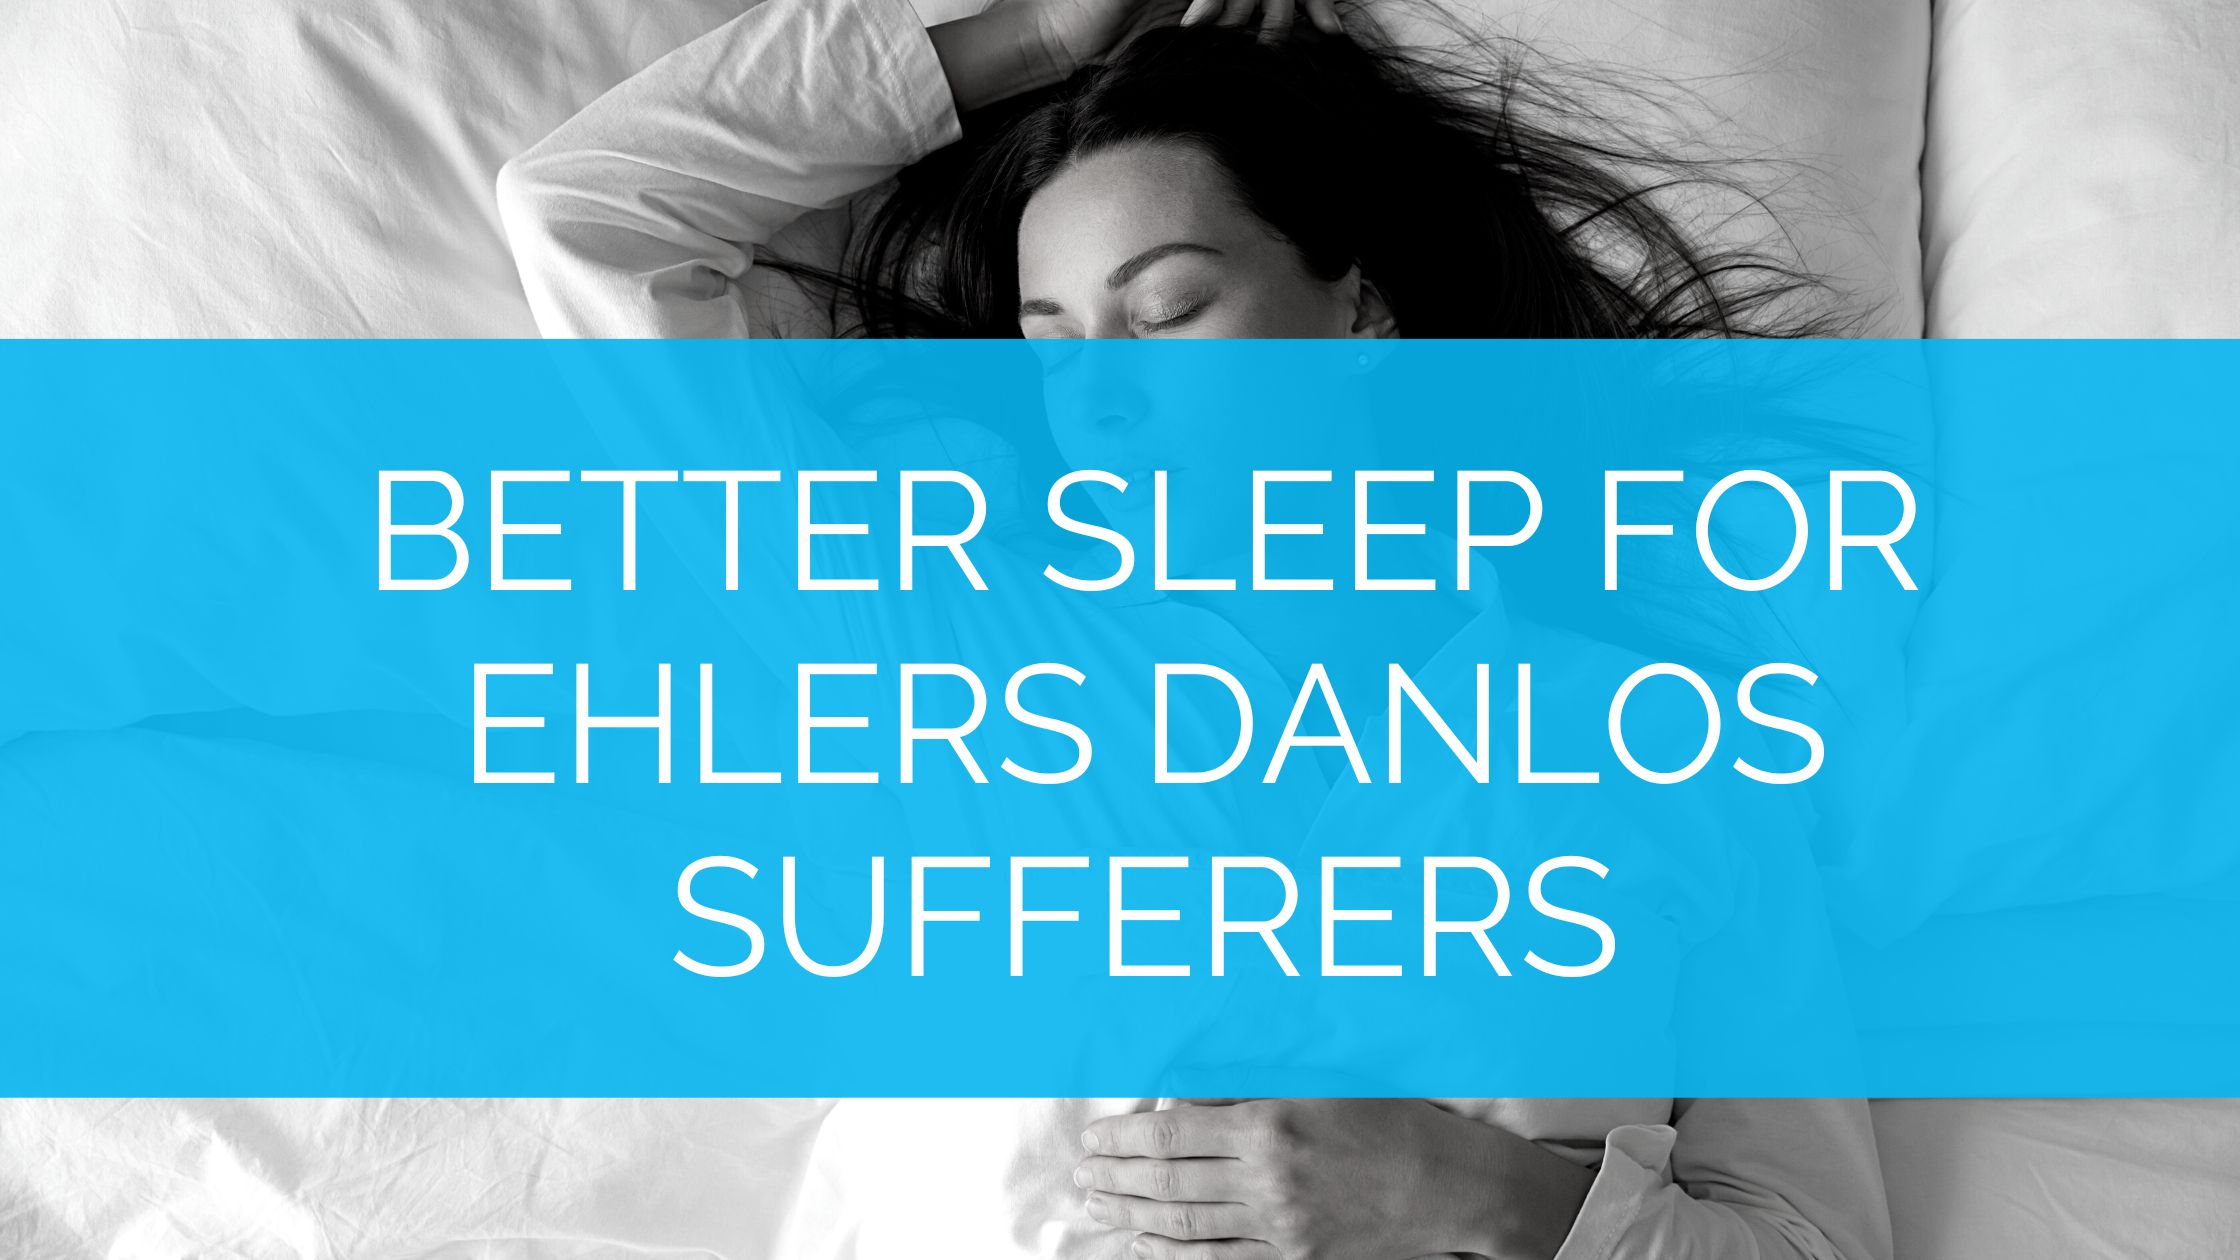 Better Sleep for Ehlers Danlos Sufferers